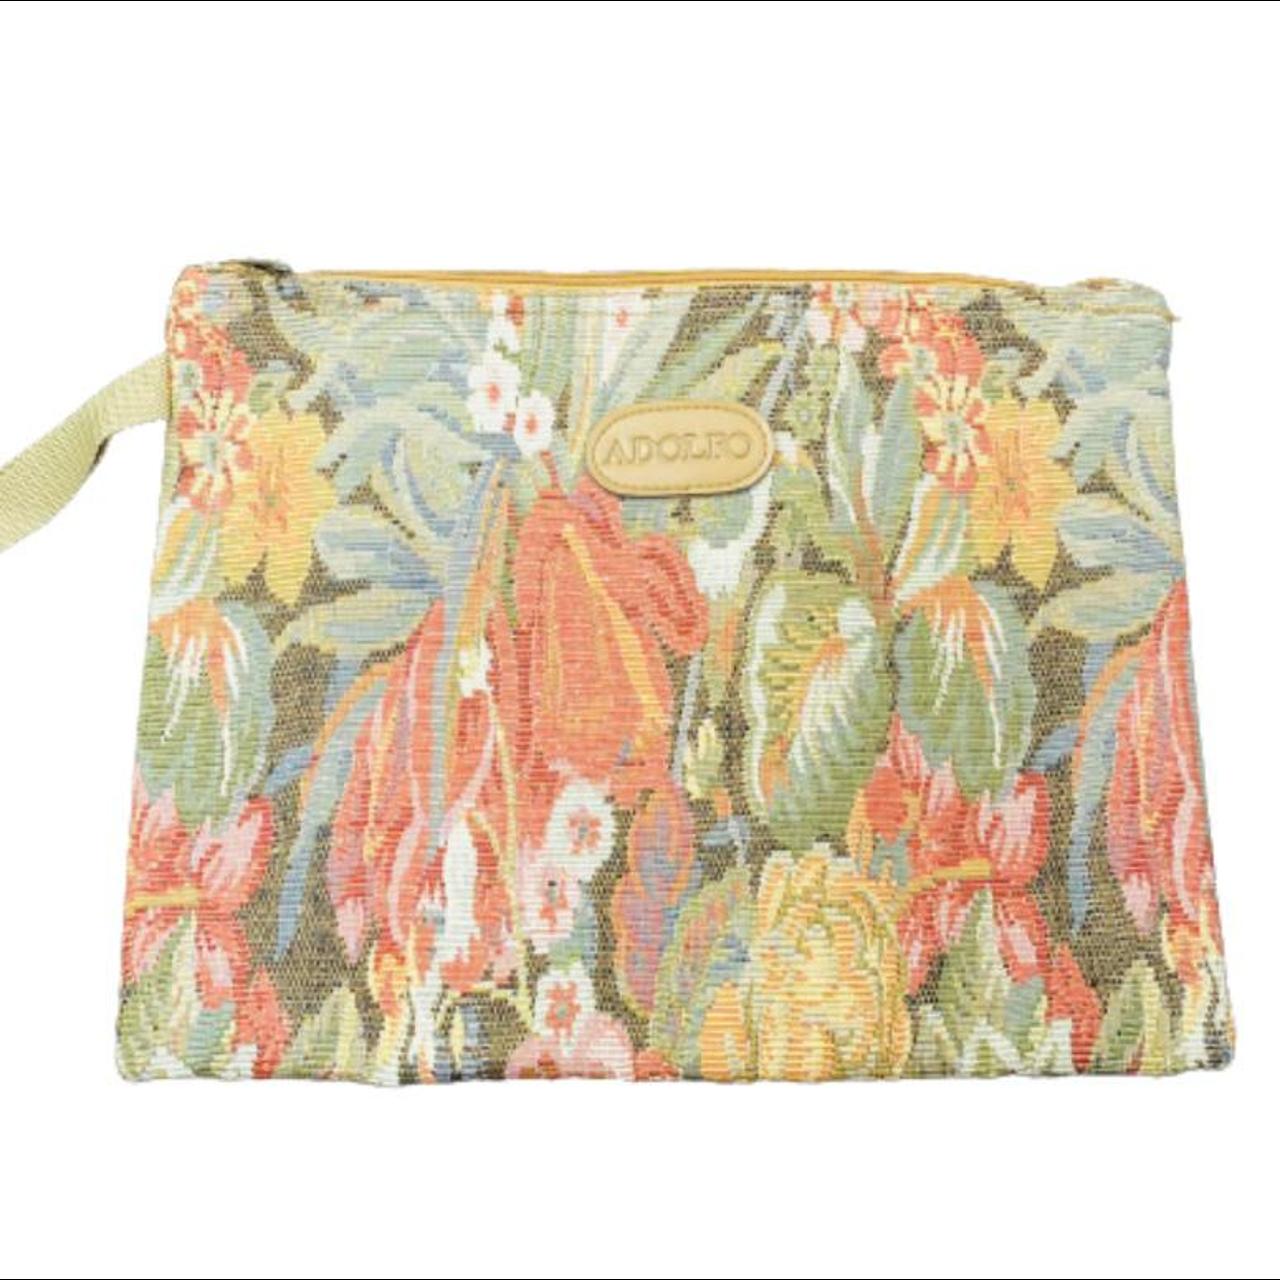 Product Image 1 - Adolfo floral zipper bag

- Made